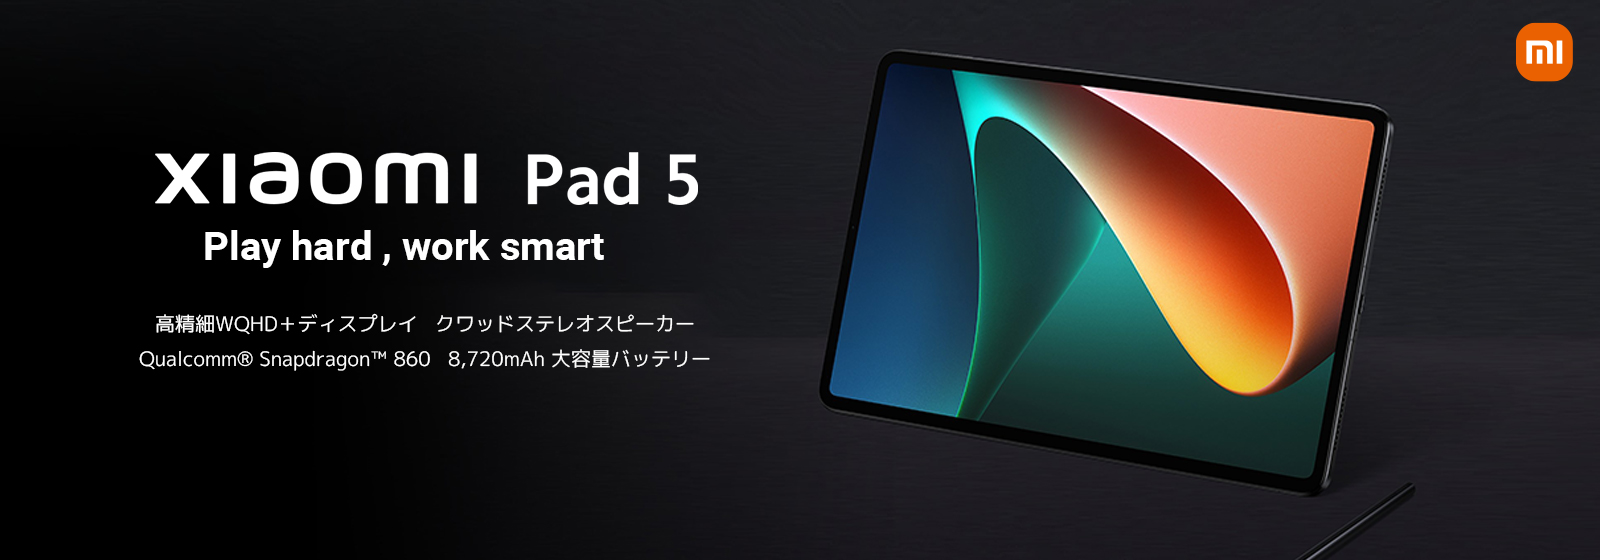 Xiaomi Pad 5 タブレット 